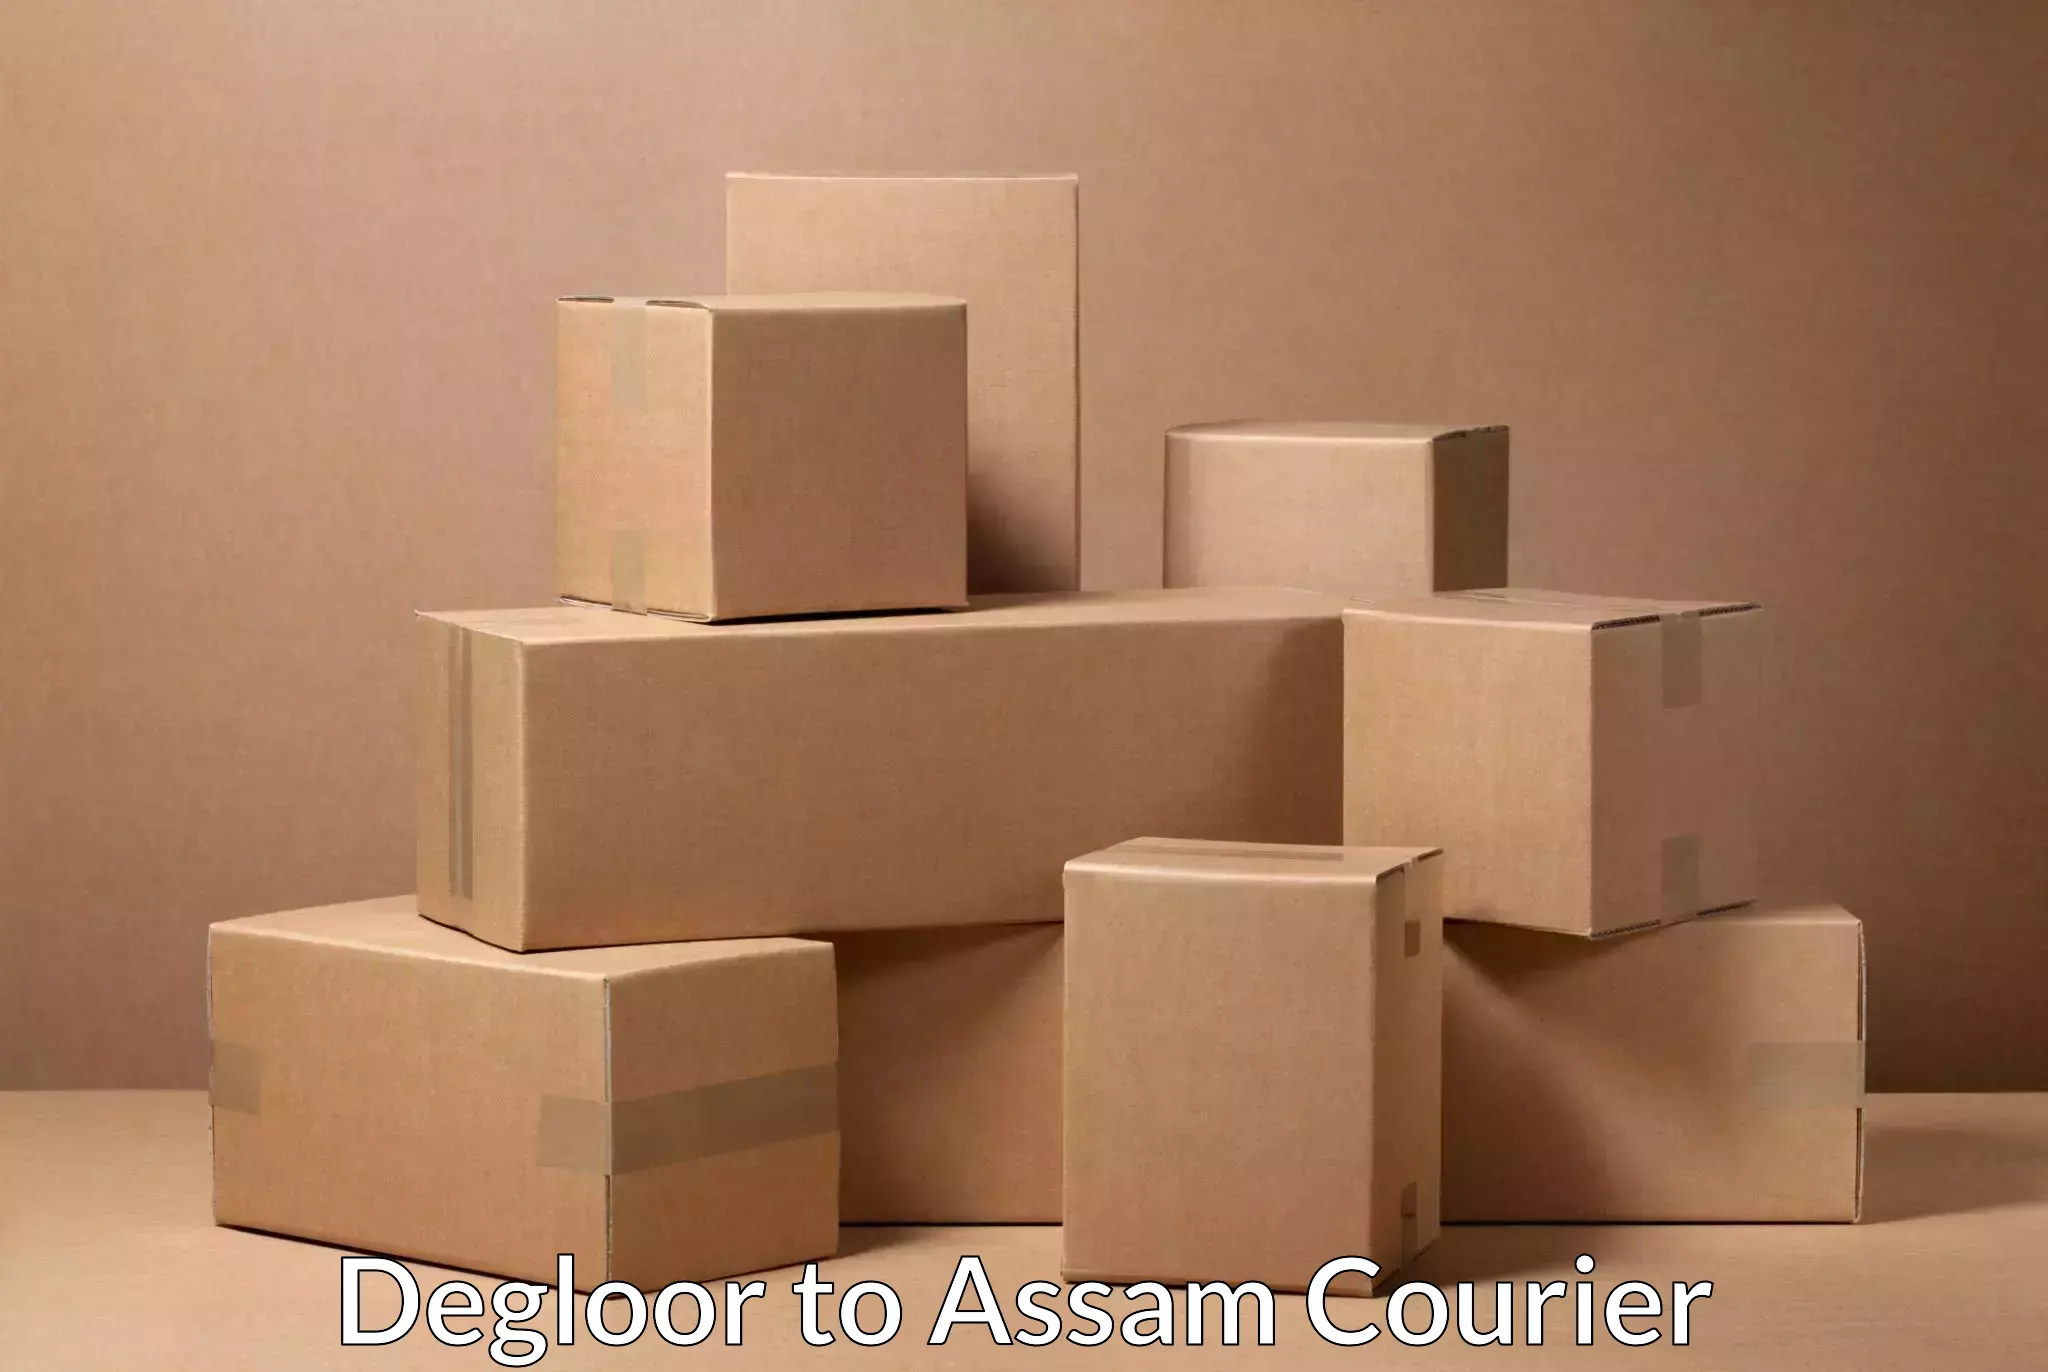 Quality courier partnerships Degloor to Lala Assam